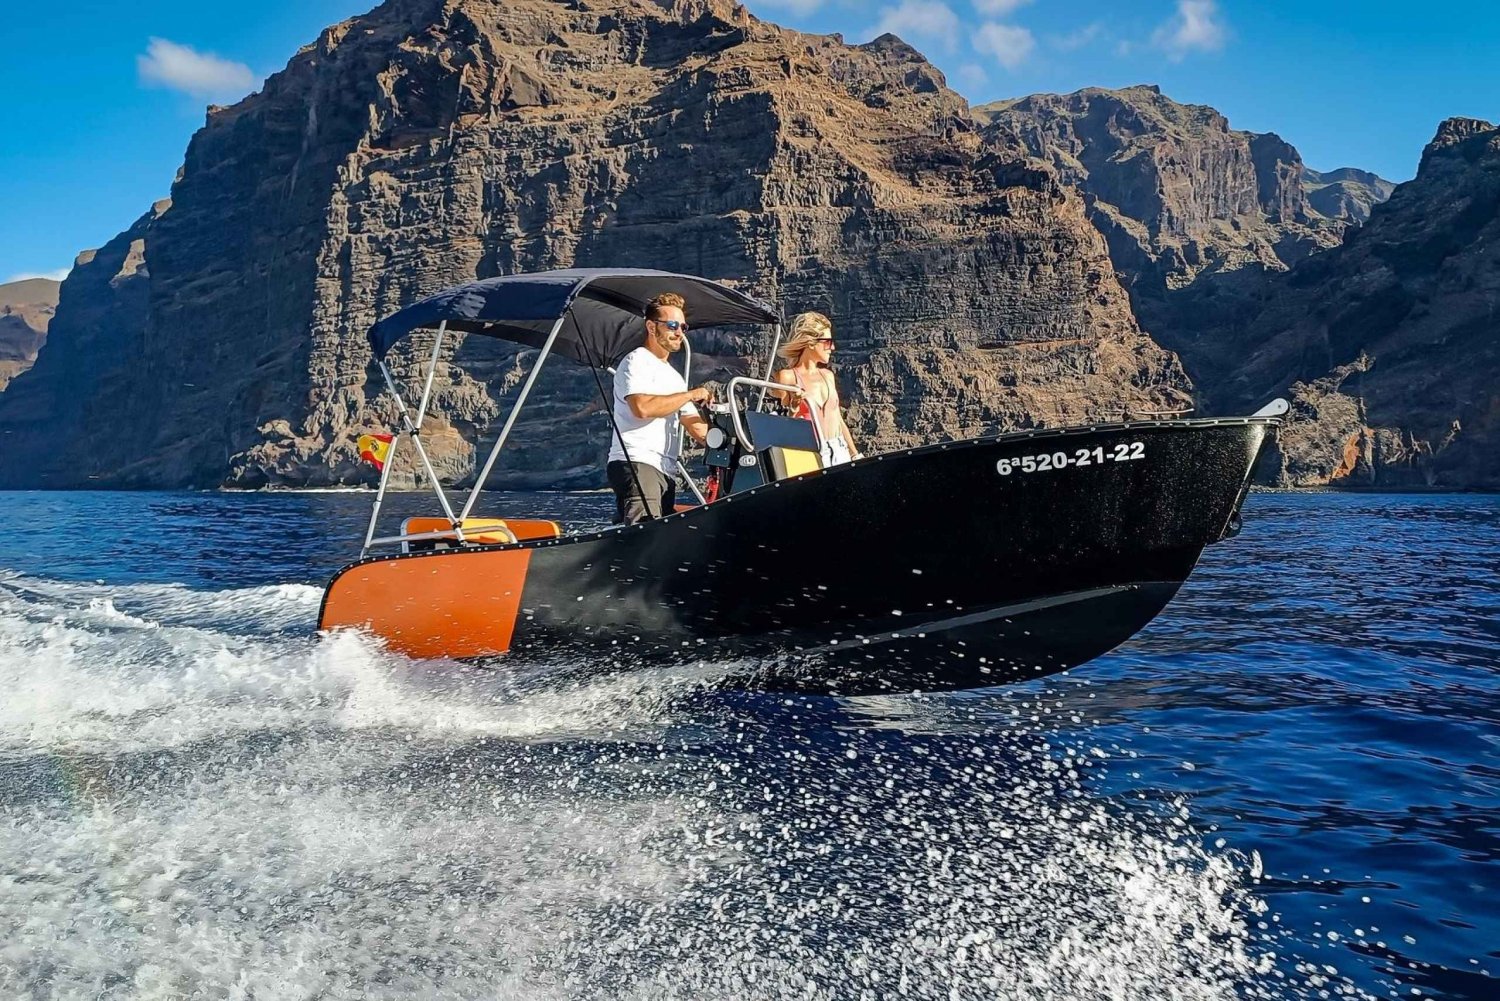 Live the ocean without license and discover Los Gigantes